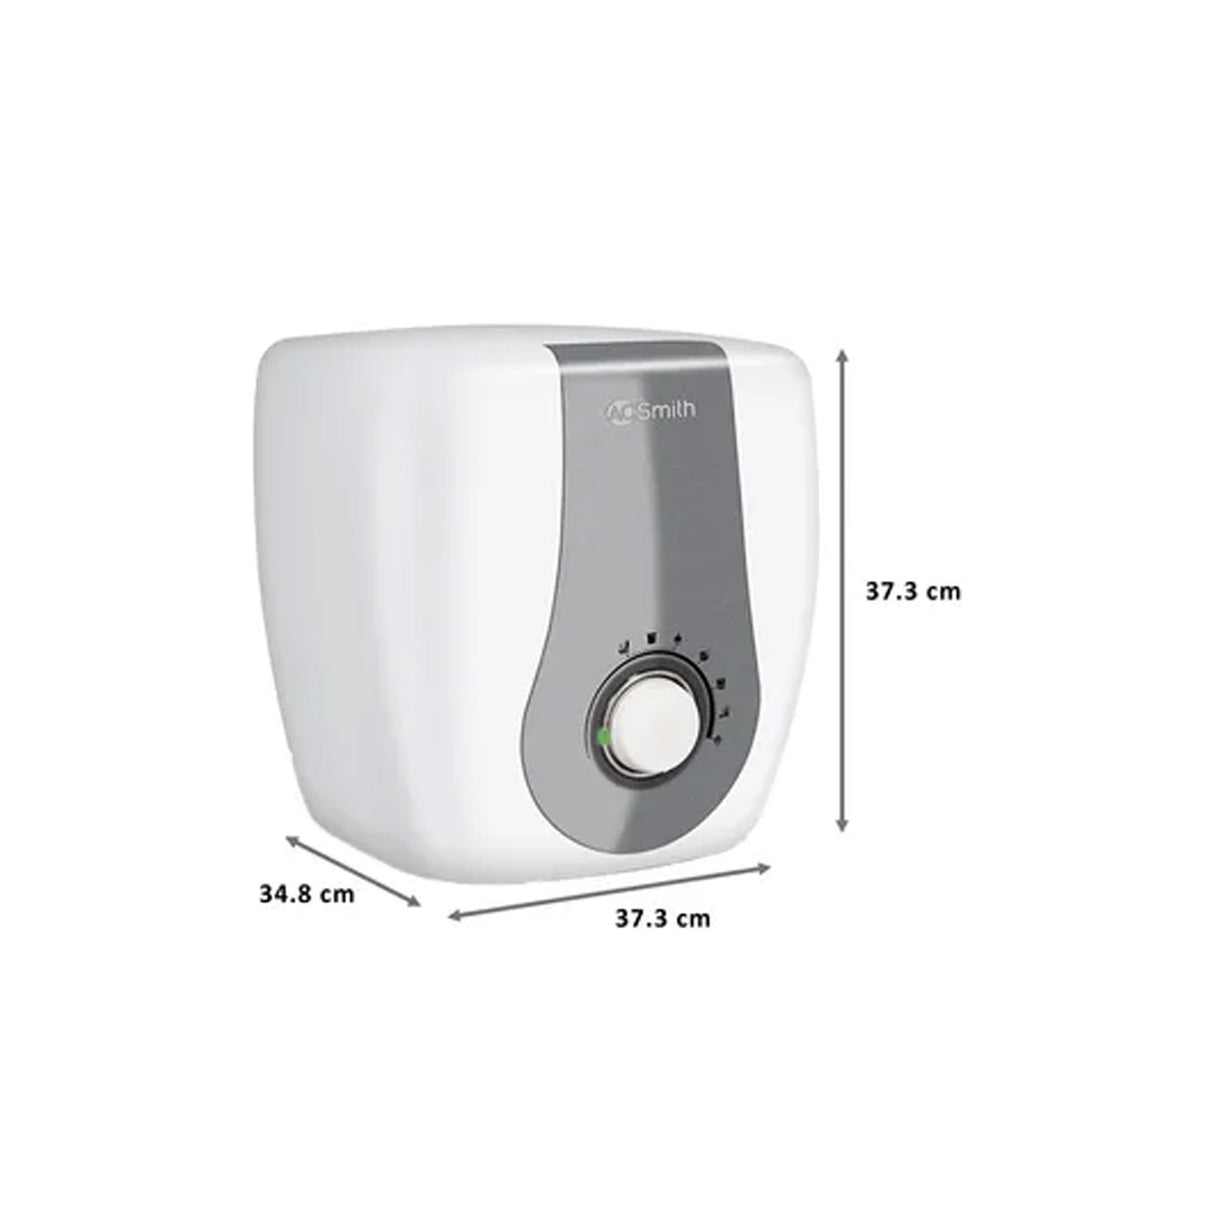 AO Smith Finesse 15L 5-Star Water Geyser (2000W) – Best Heating Solution in White.